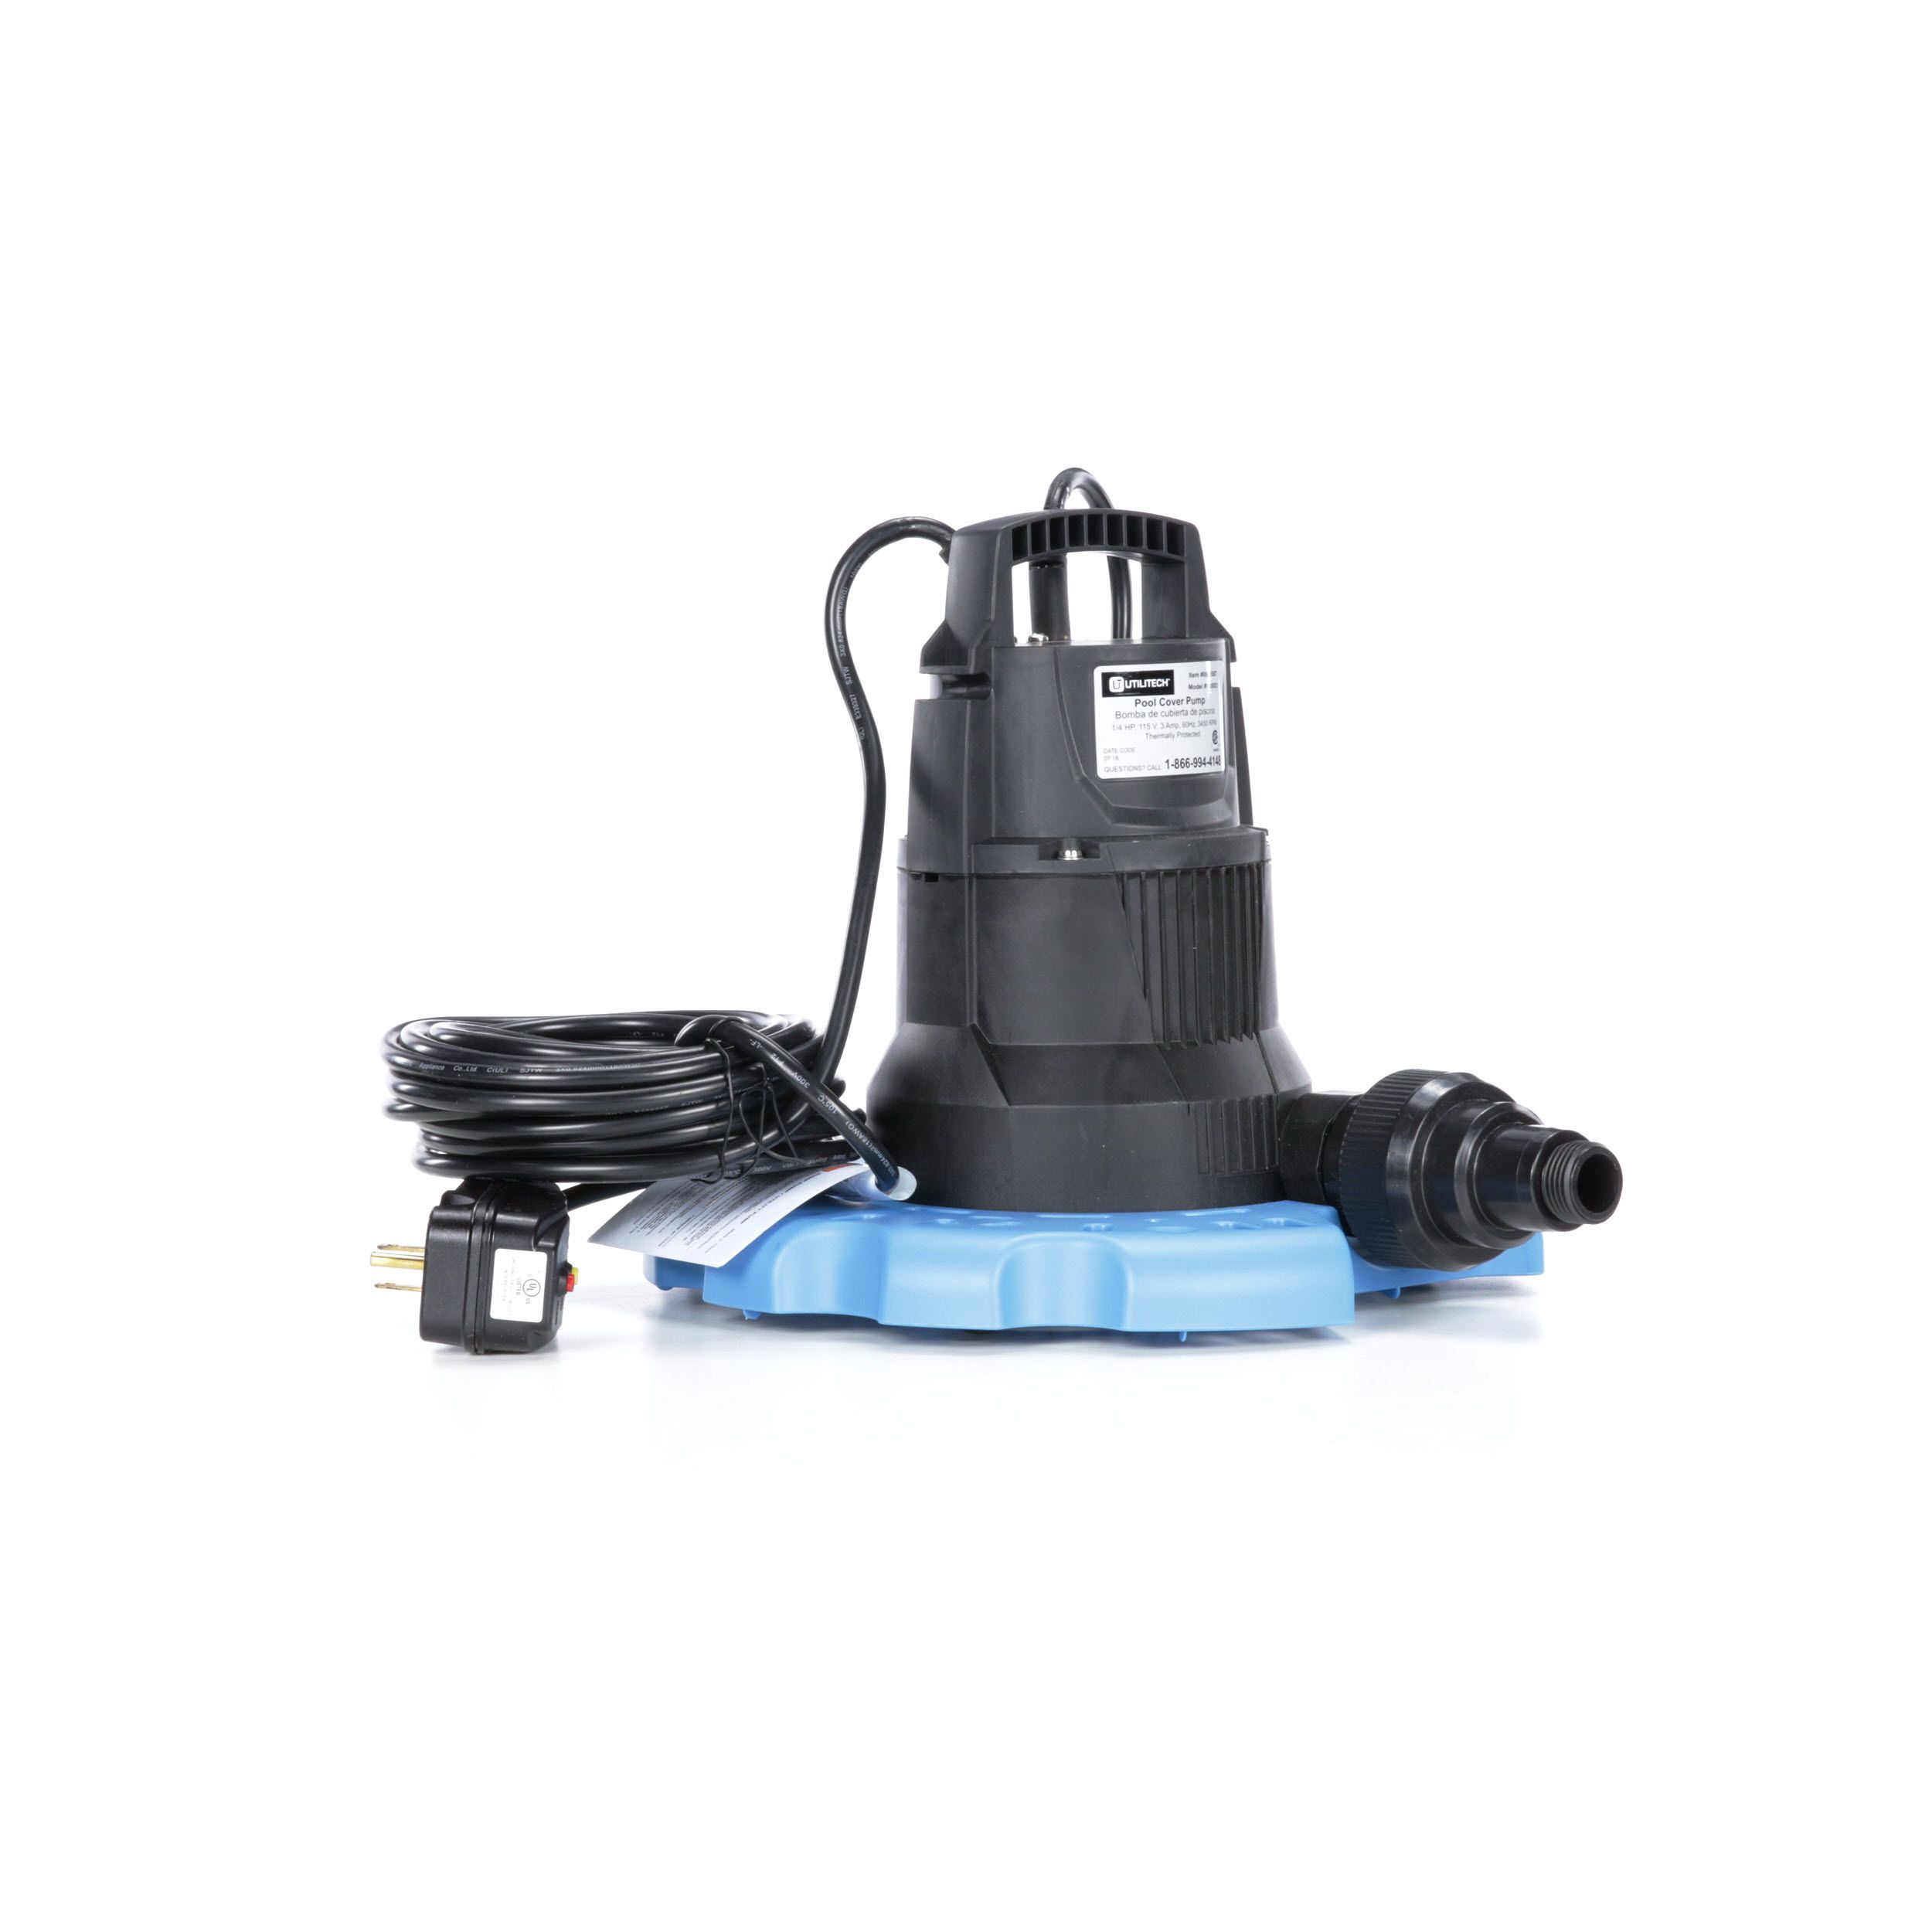 Cpa Swimming Pool Pump Summersa Dab Eurocover Reversing Cover Winter and Swimming Pool